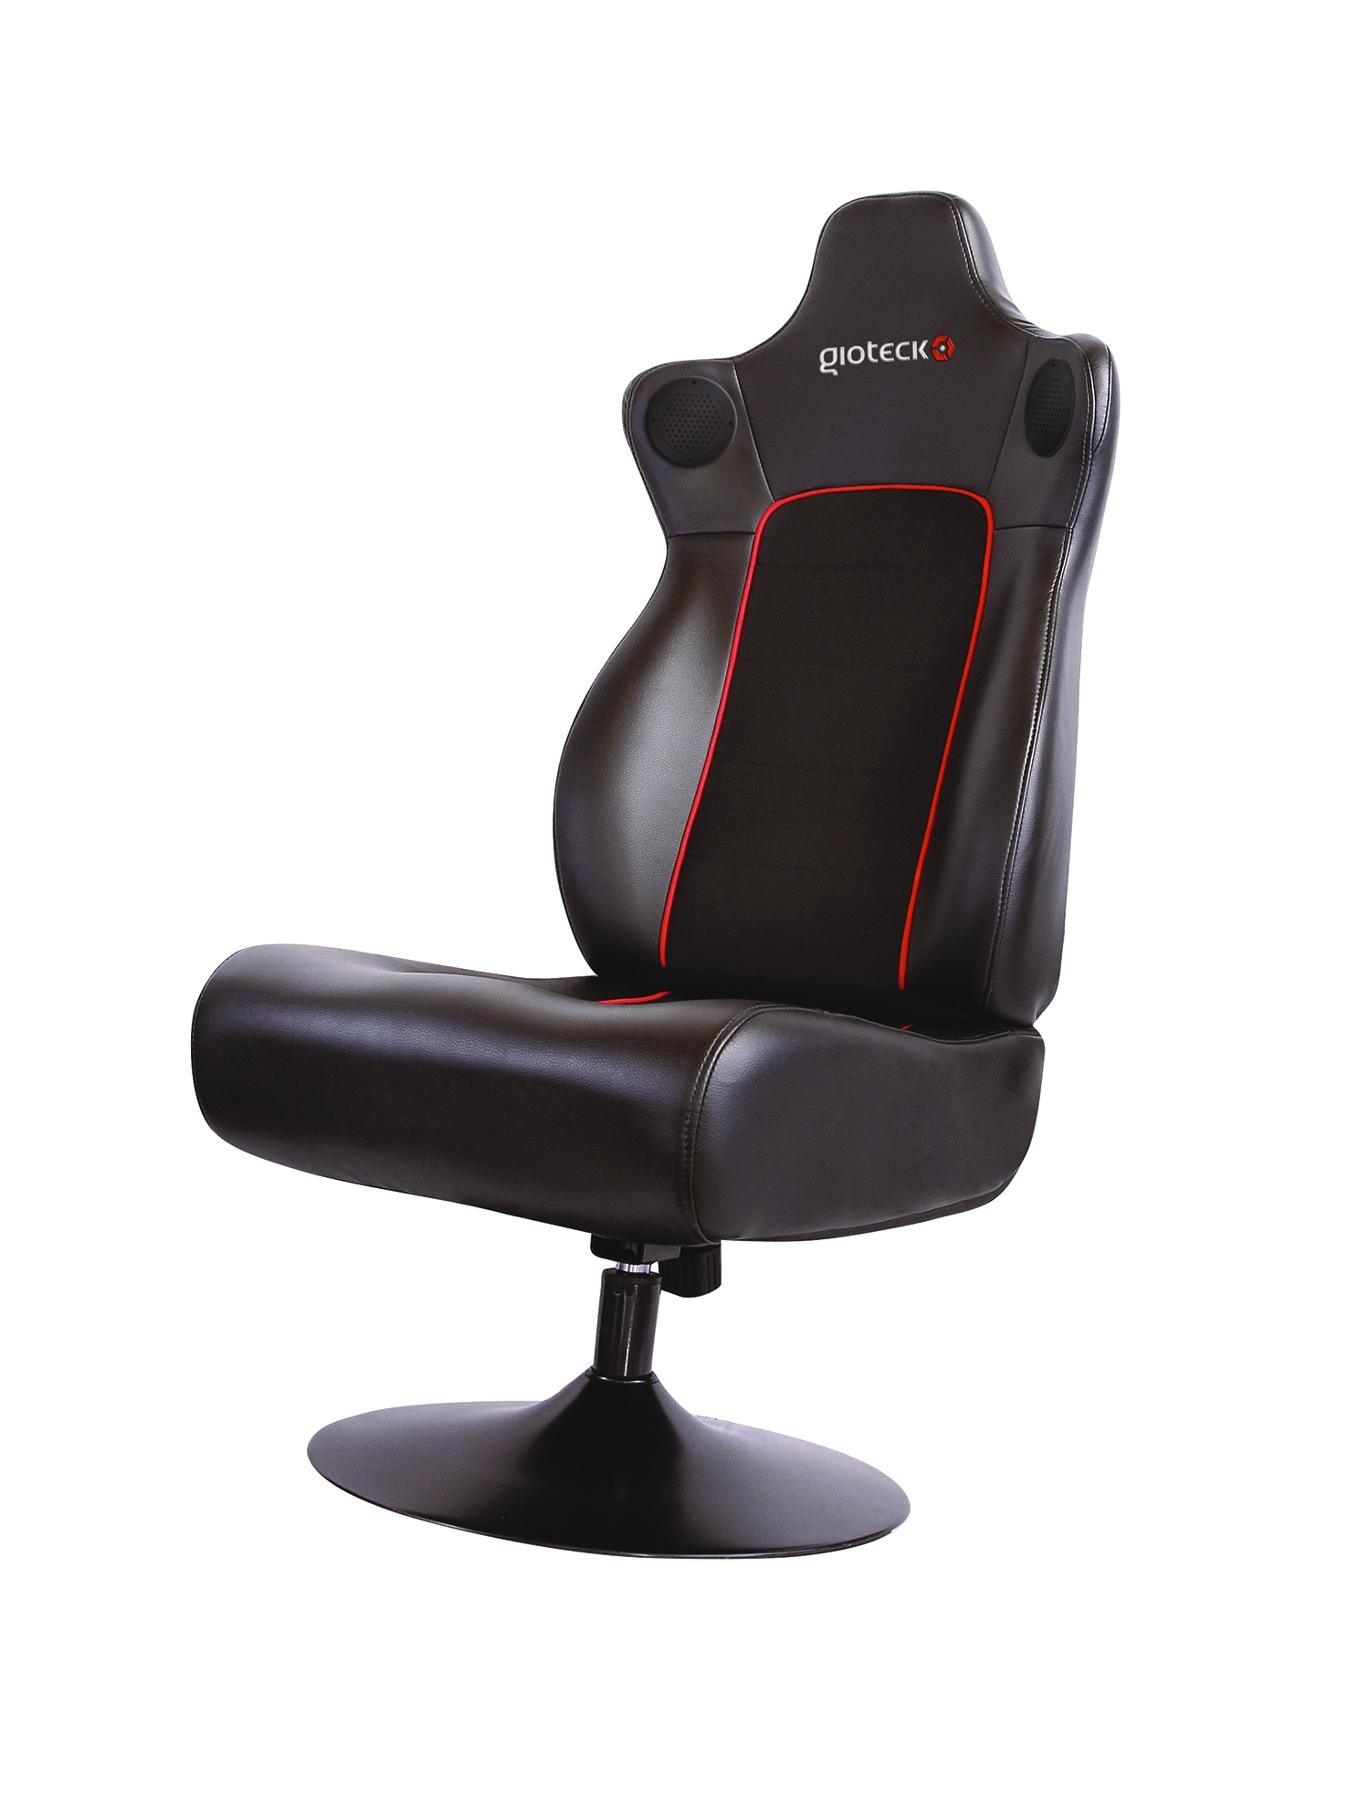 budget gaming chair